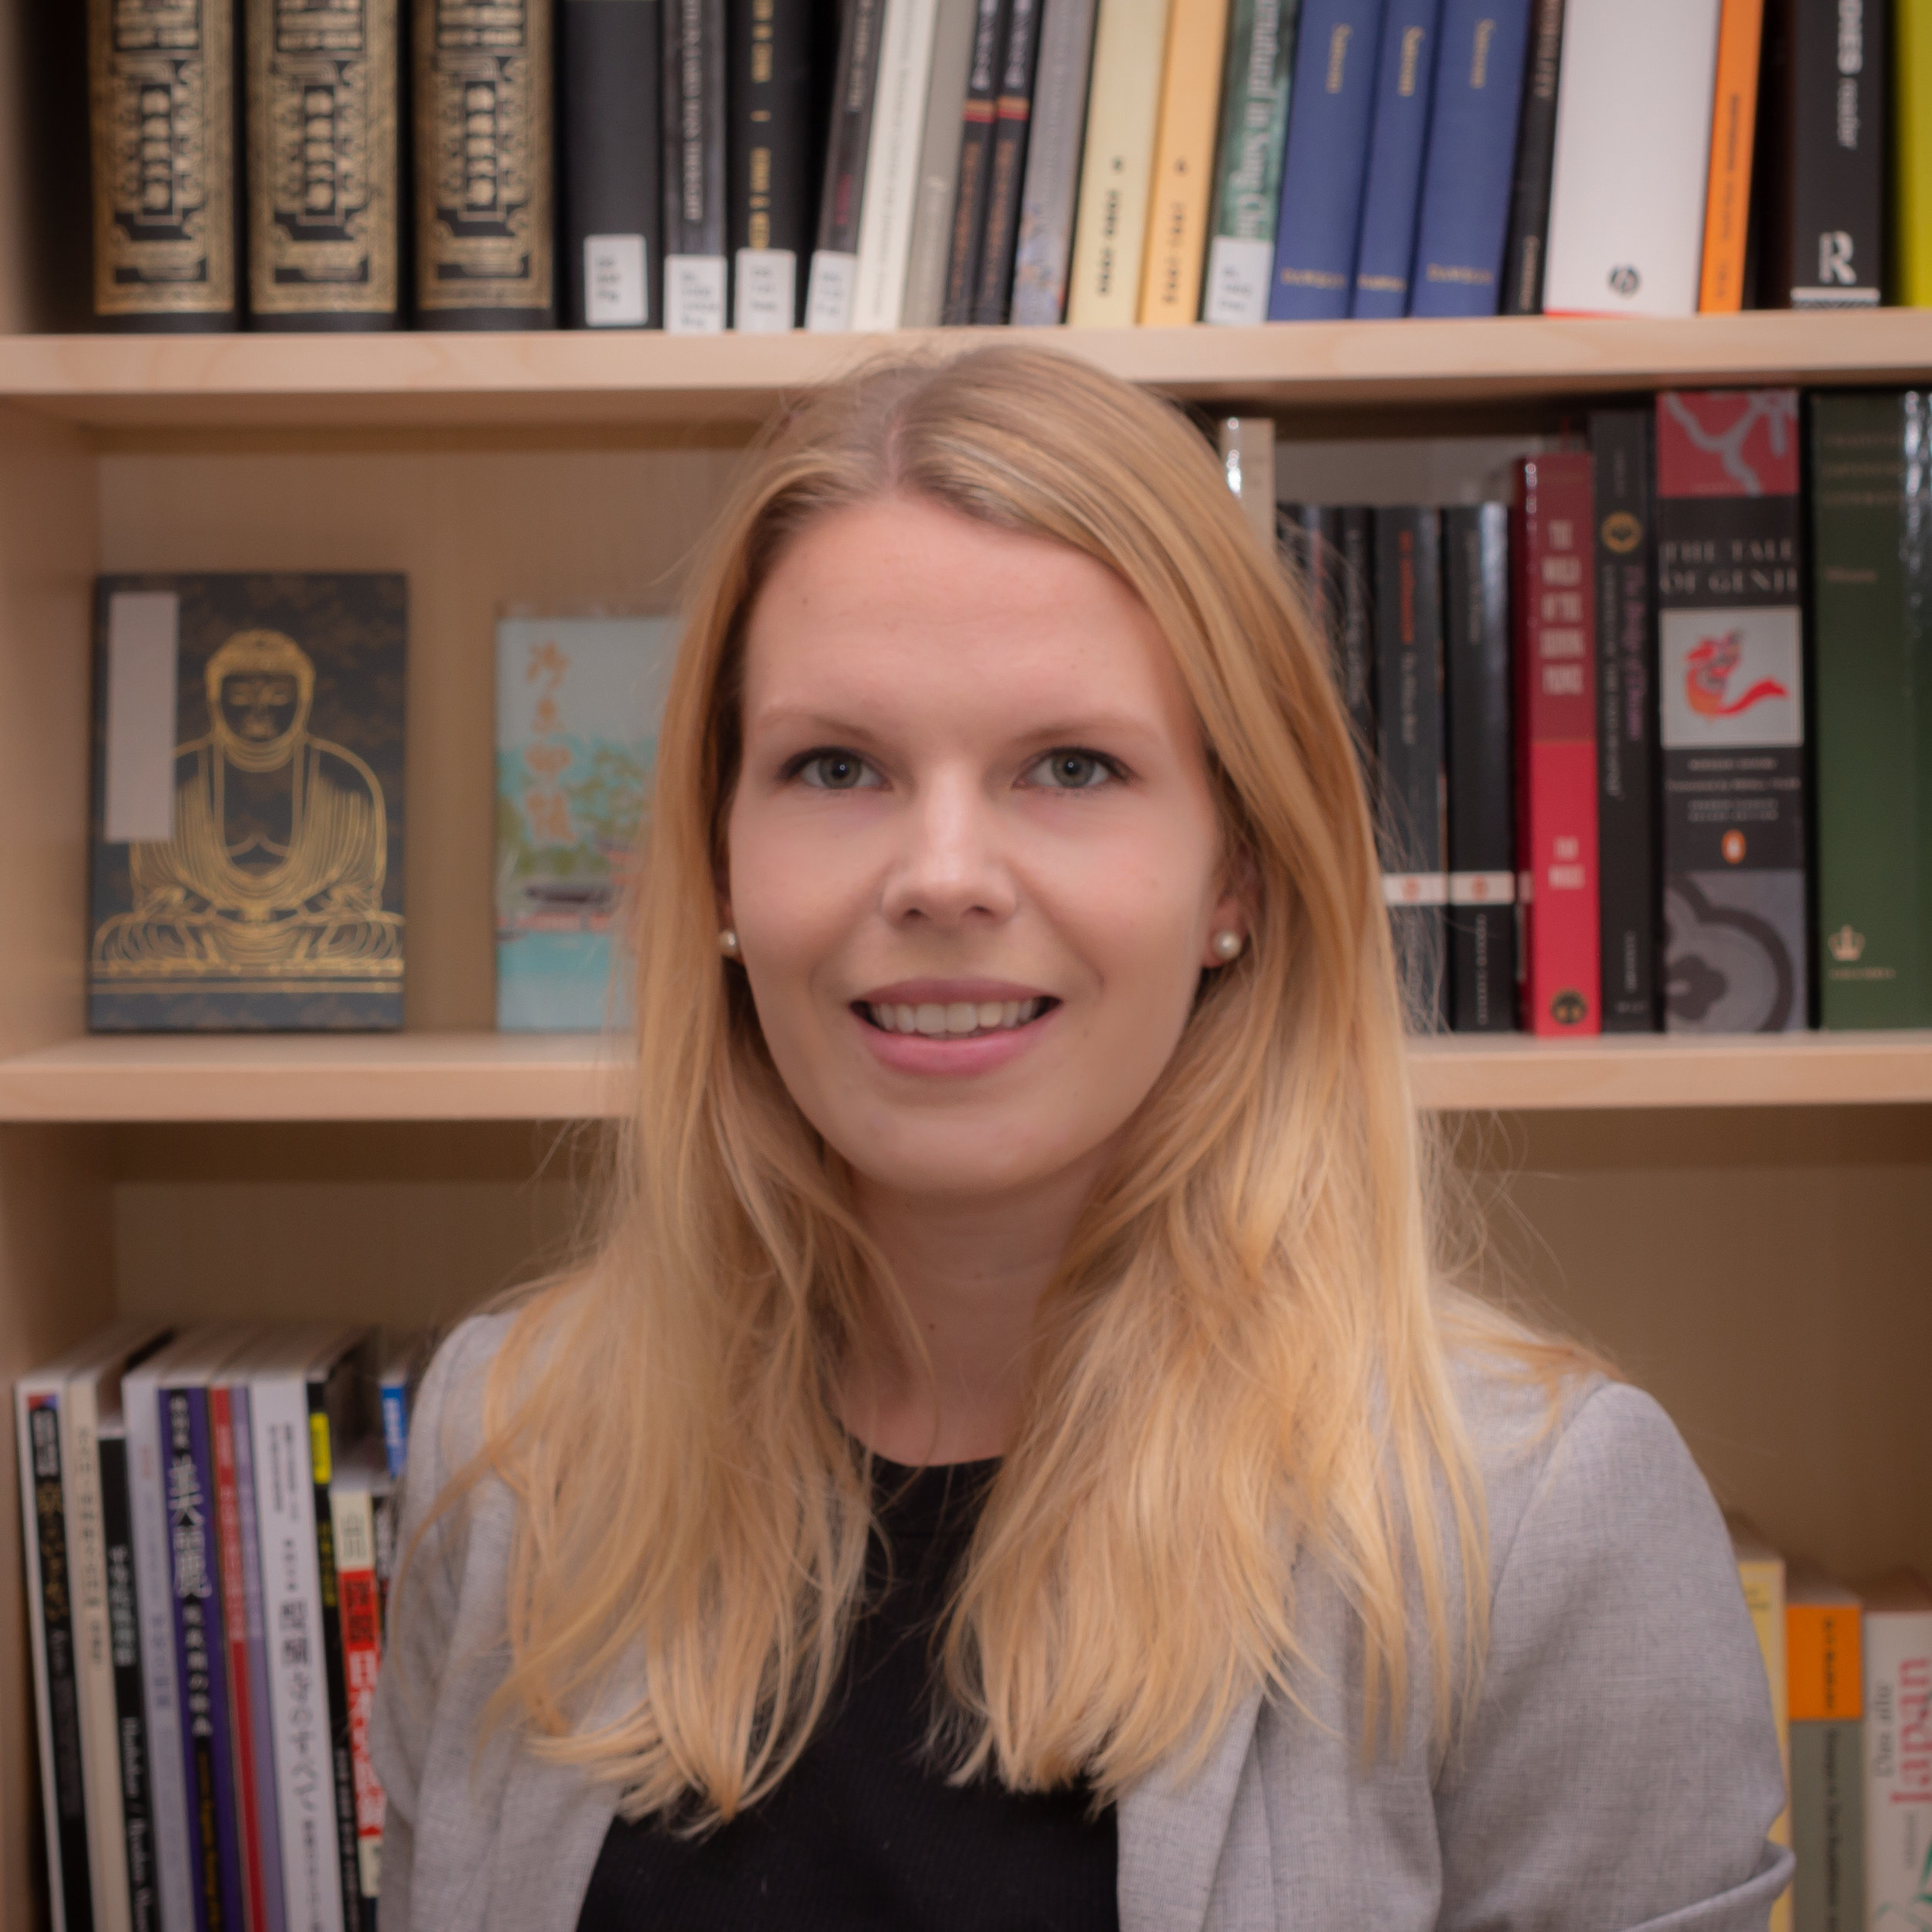 Nathalie PhillipsNathalie began her PhD in Edinburgh in 2014, funded by the Sasakawa Foundation. Since then she has been awarded a grant by the Japan Foundation Endowment Committee in order to consult and collect primary source materials at the Hist…